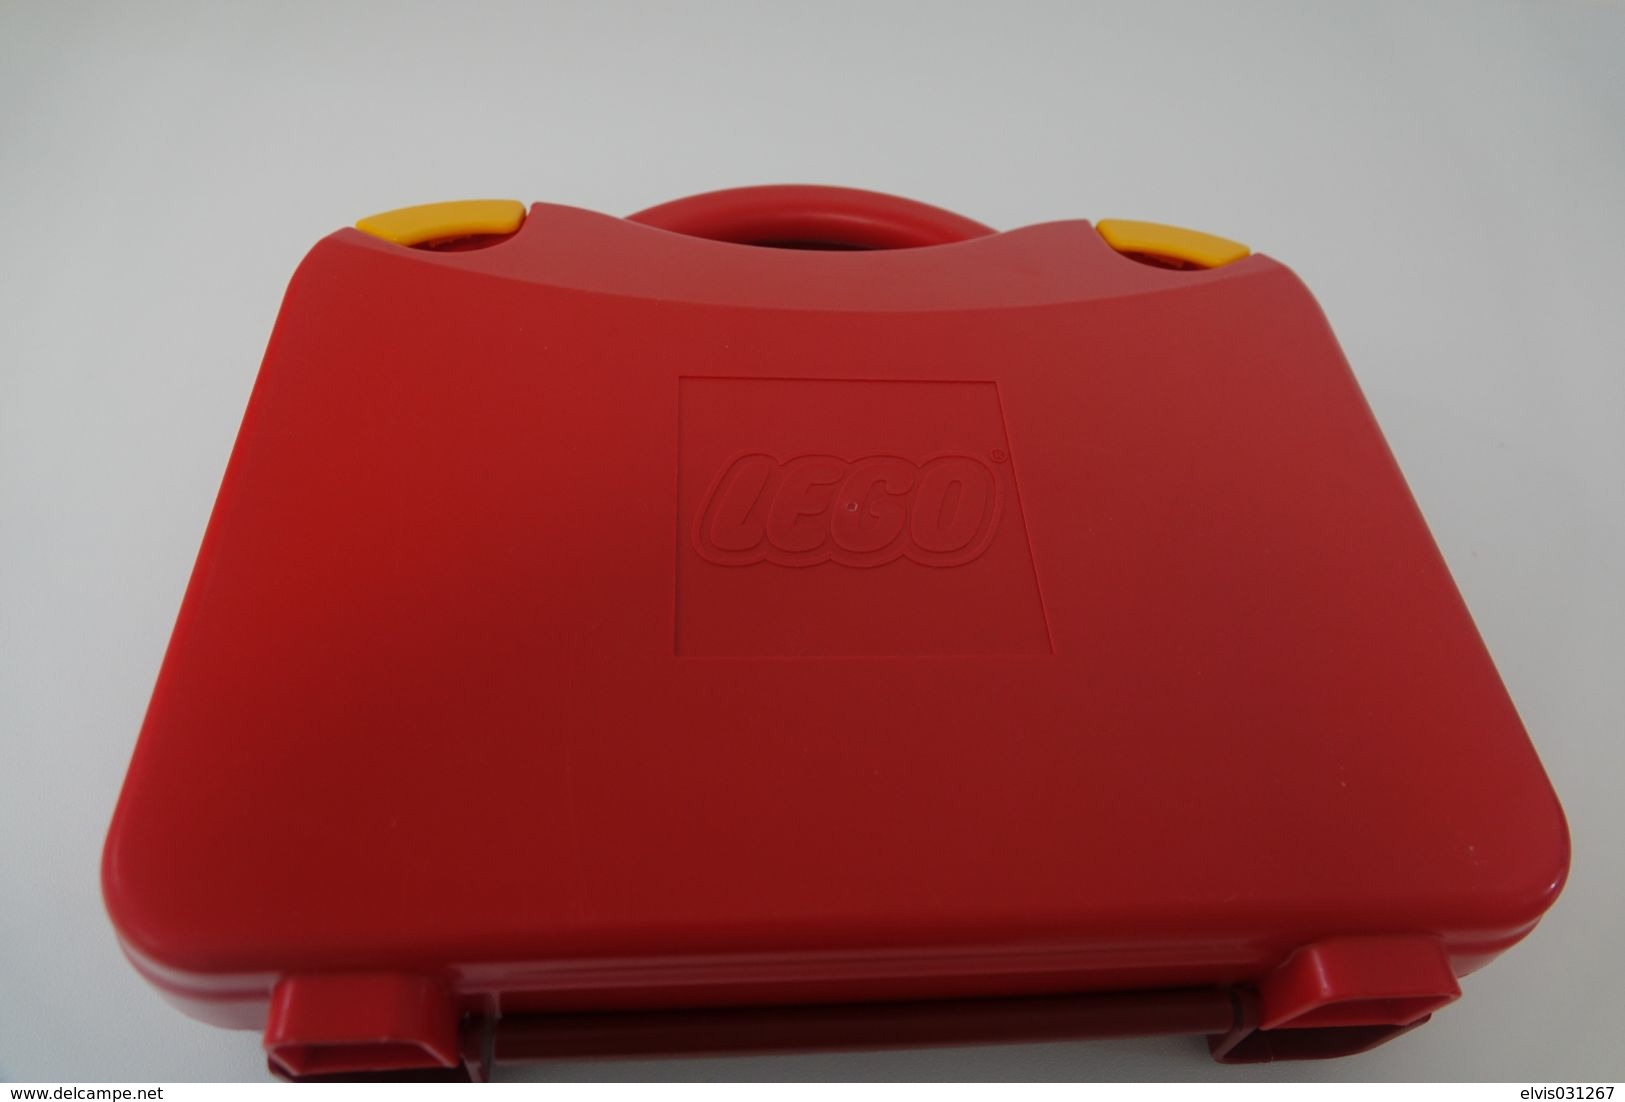 LEGO - 759528c03 - Storage Case With Rounded Corners And Red Lid, Yellow Latches - Original Lego 2015 - Vintage - Catalogues